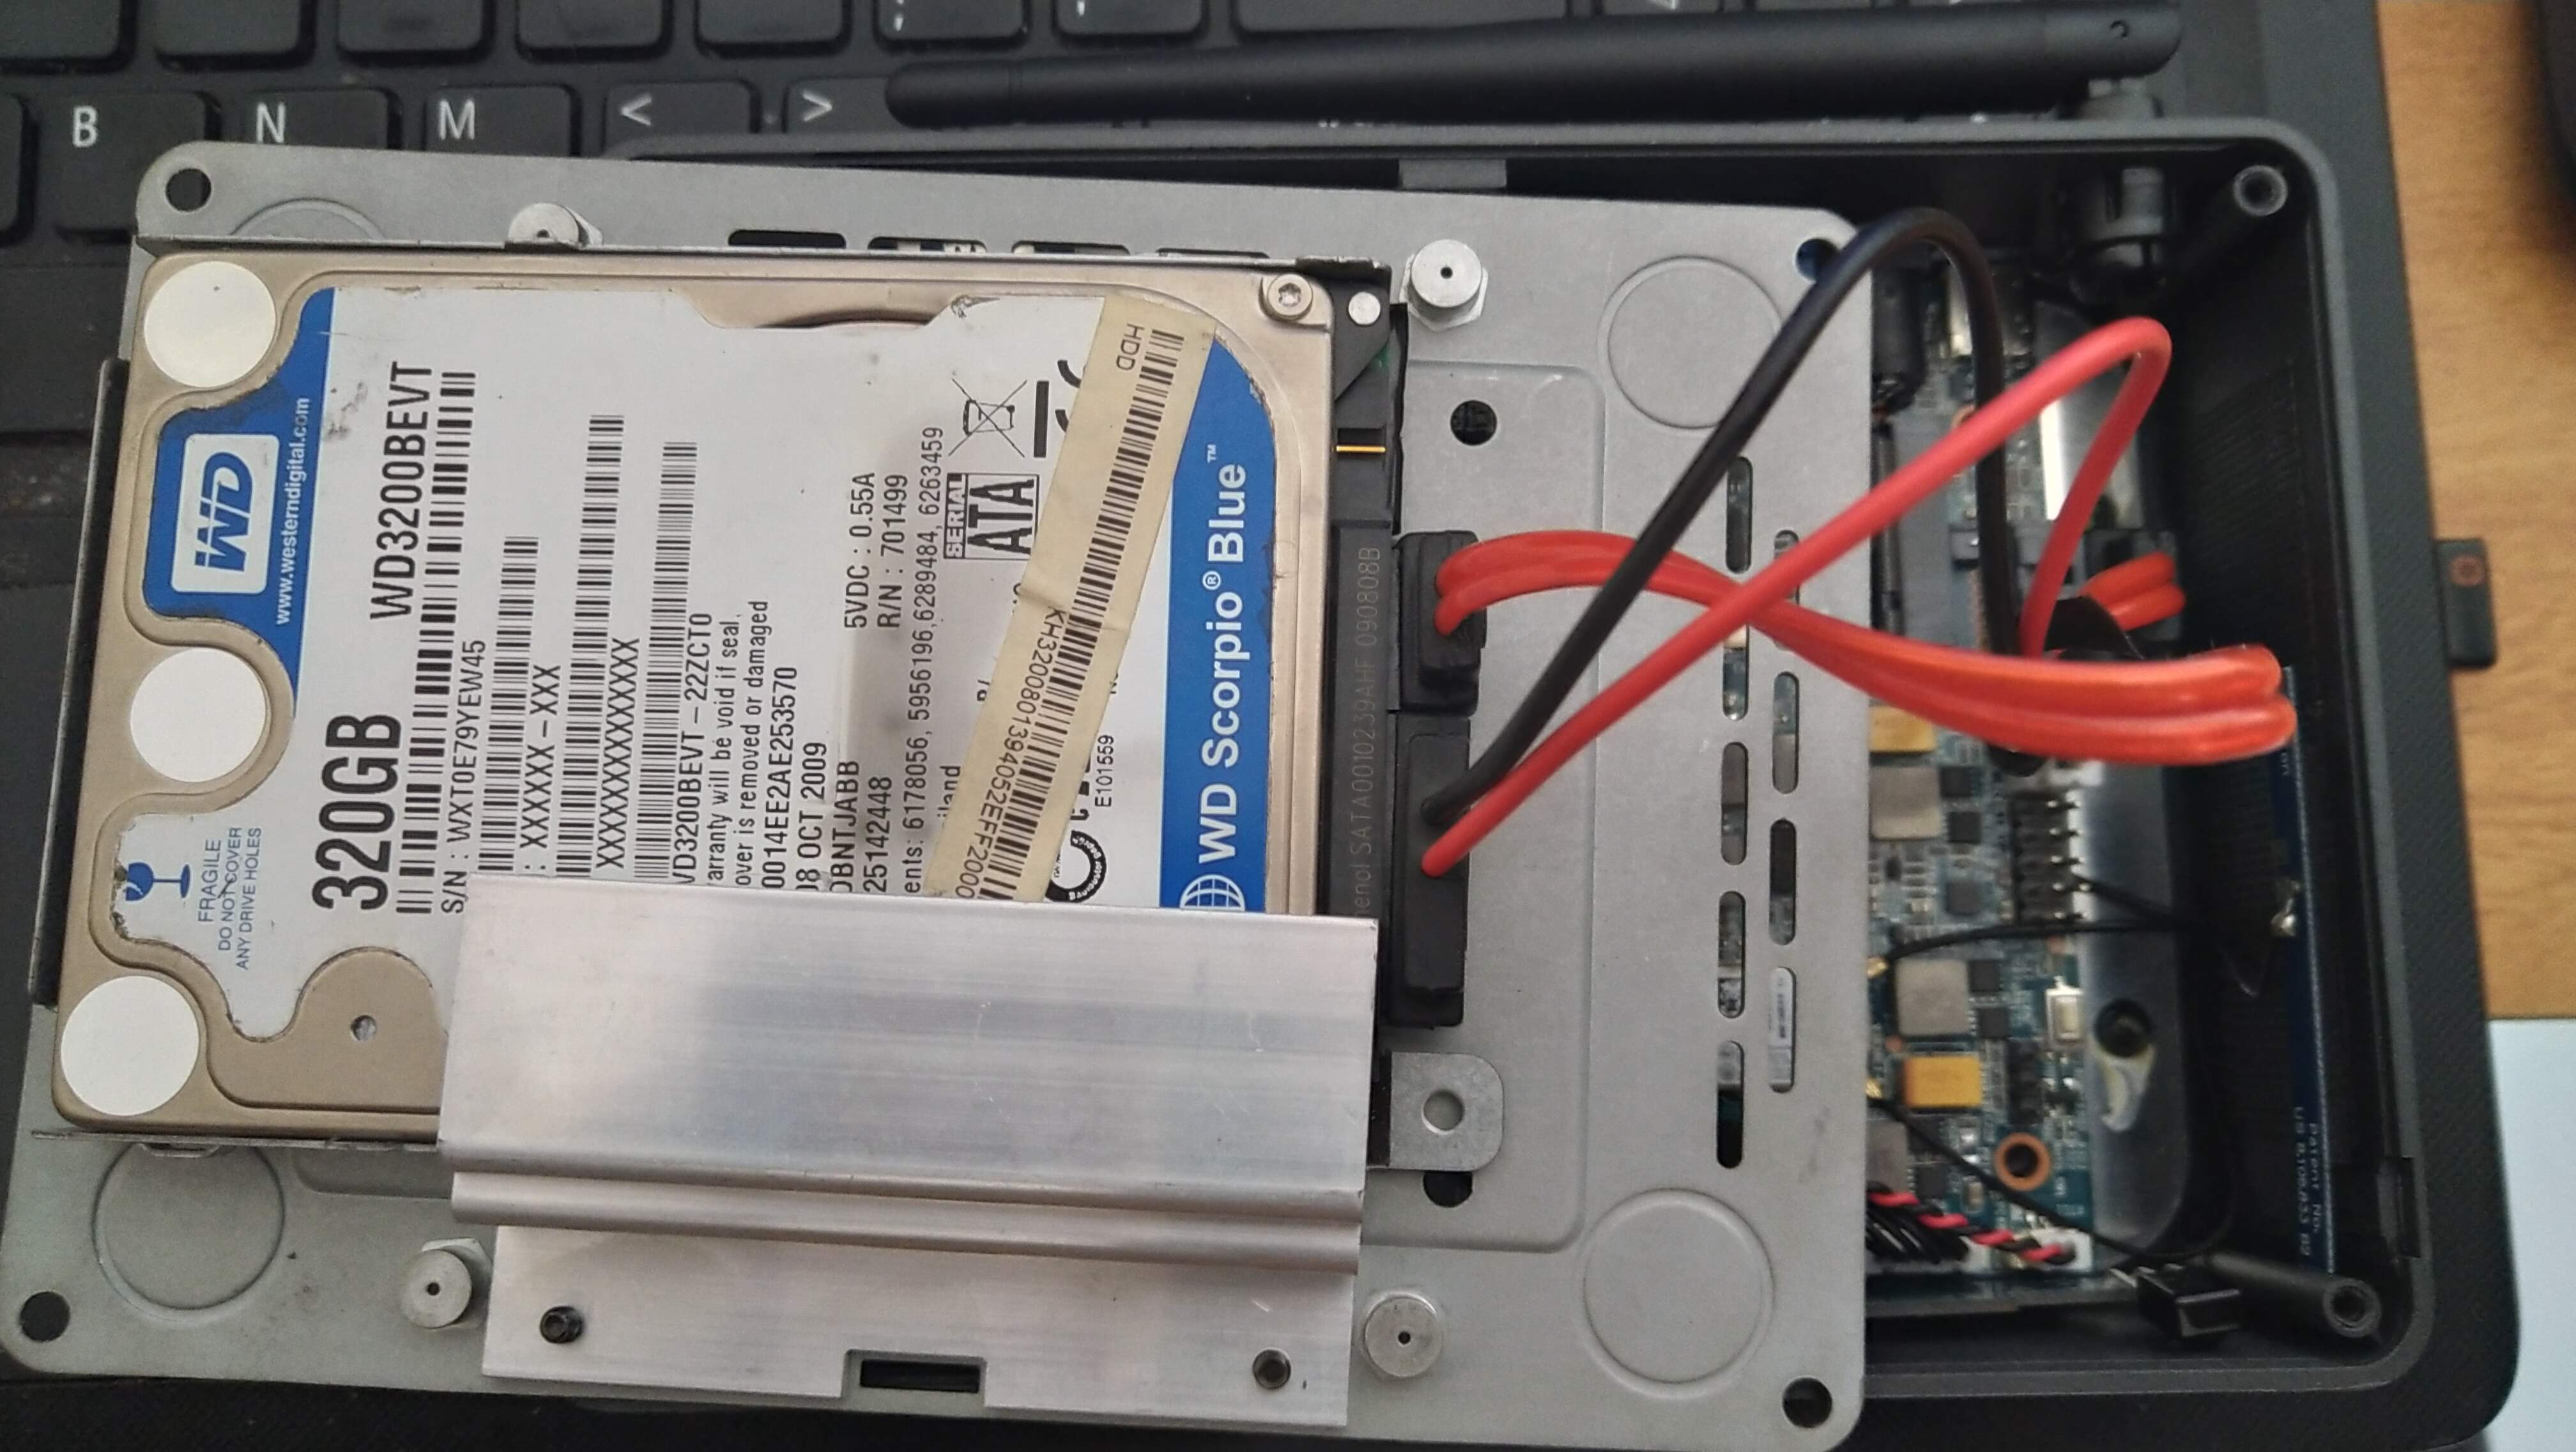 SATA HDD Connected to Byte3